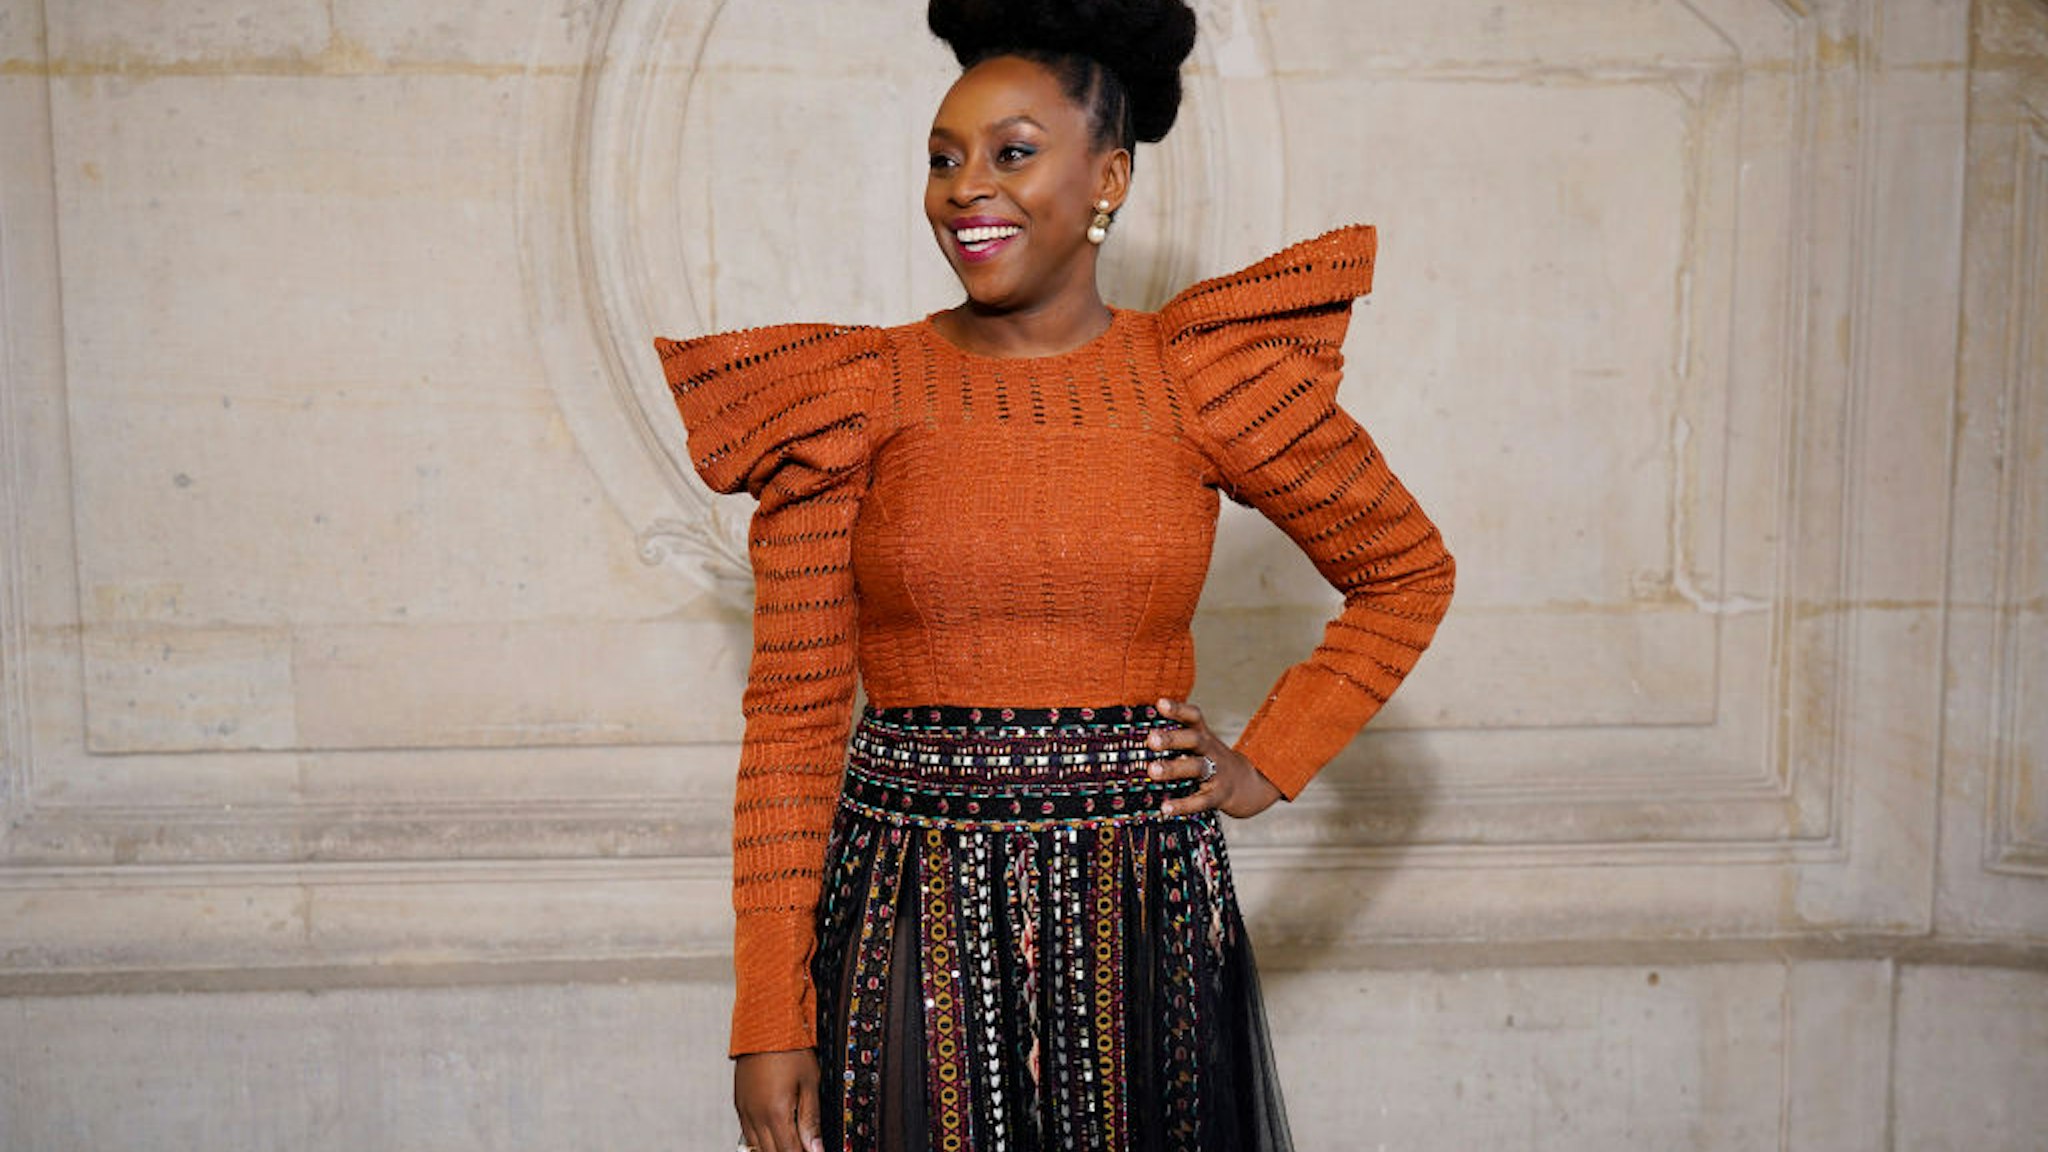 Chimamanda Ngozi Adichie attends the Dior Haute Couture Spring/Summer 2020 show as part of Paris Fashion Week on January 20, 2020 in Paris, France.